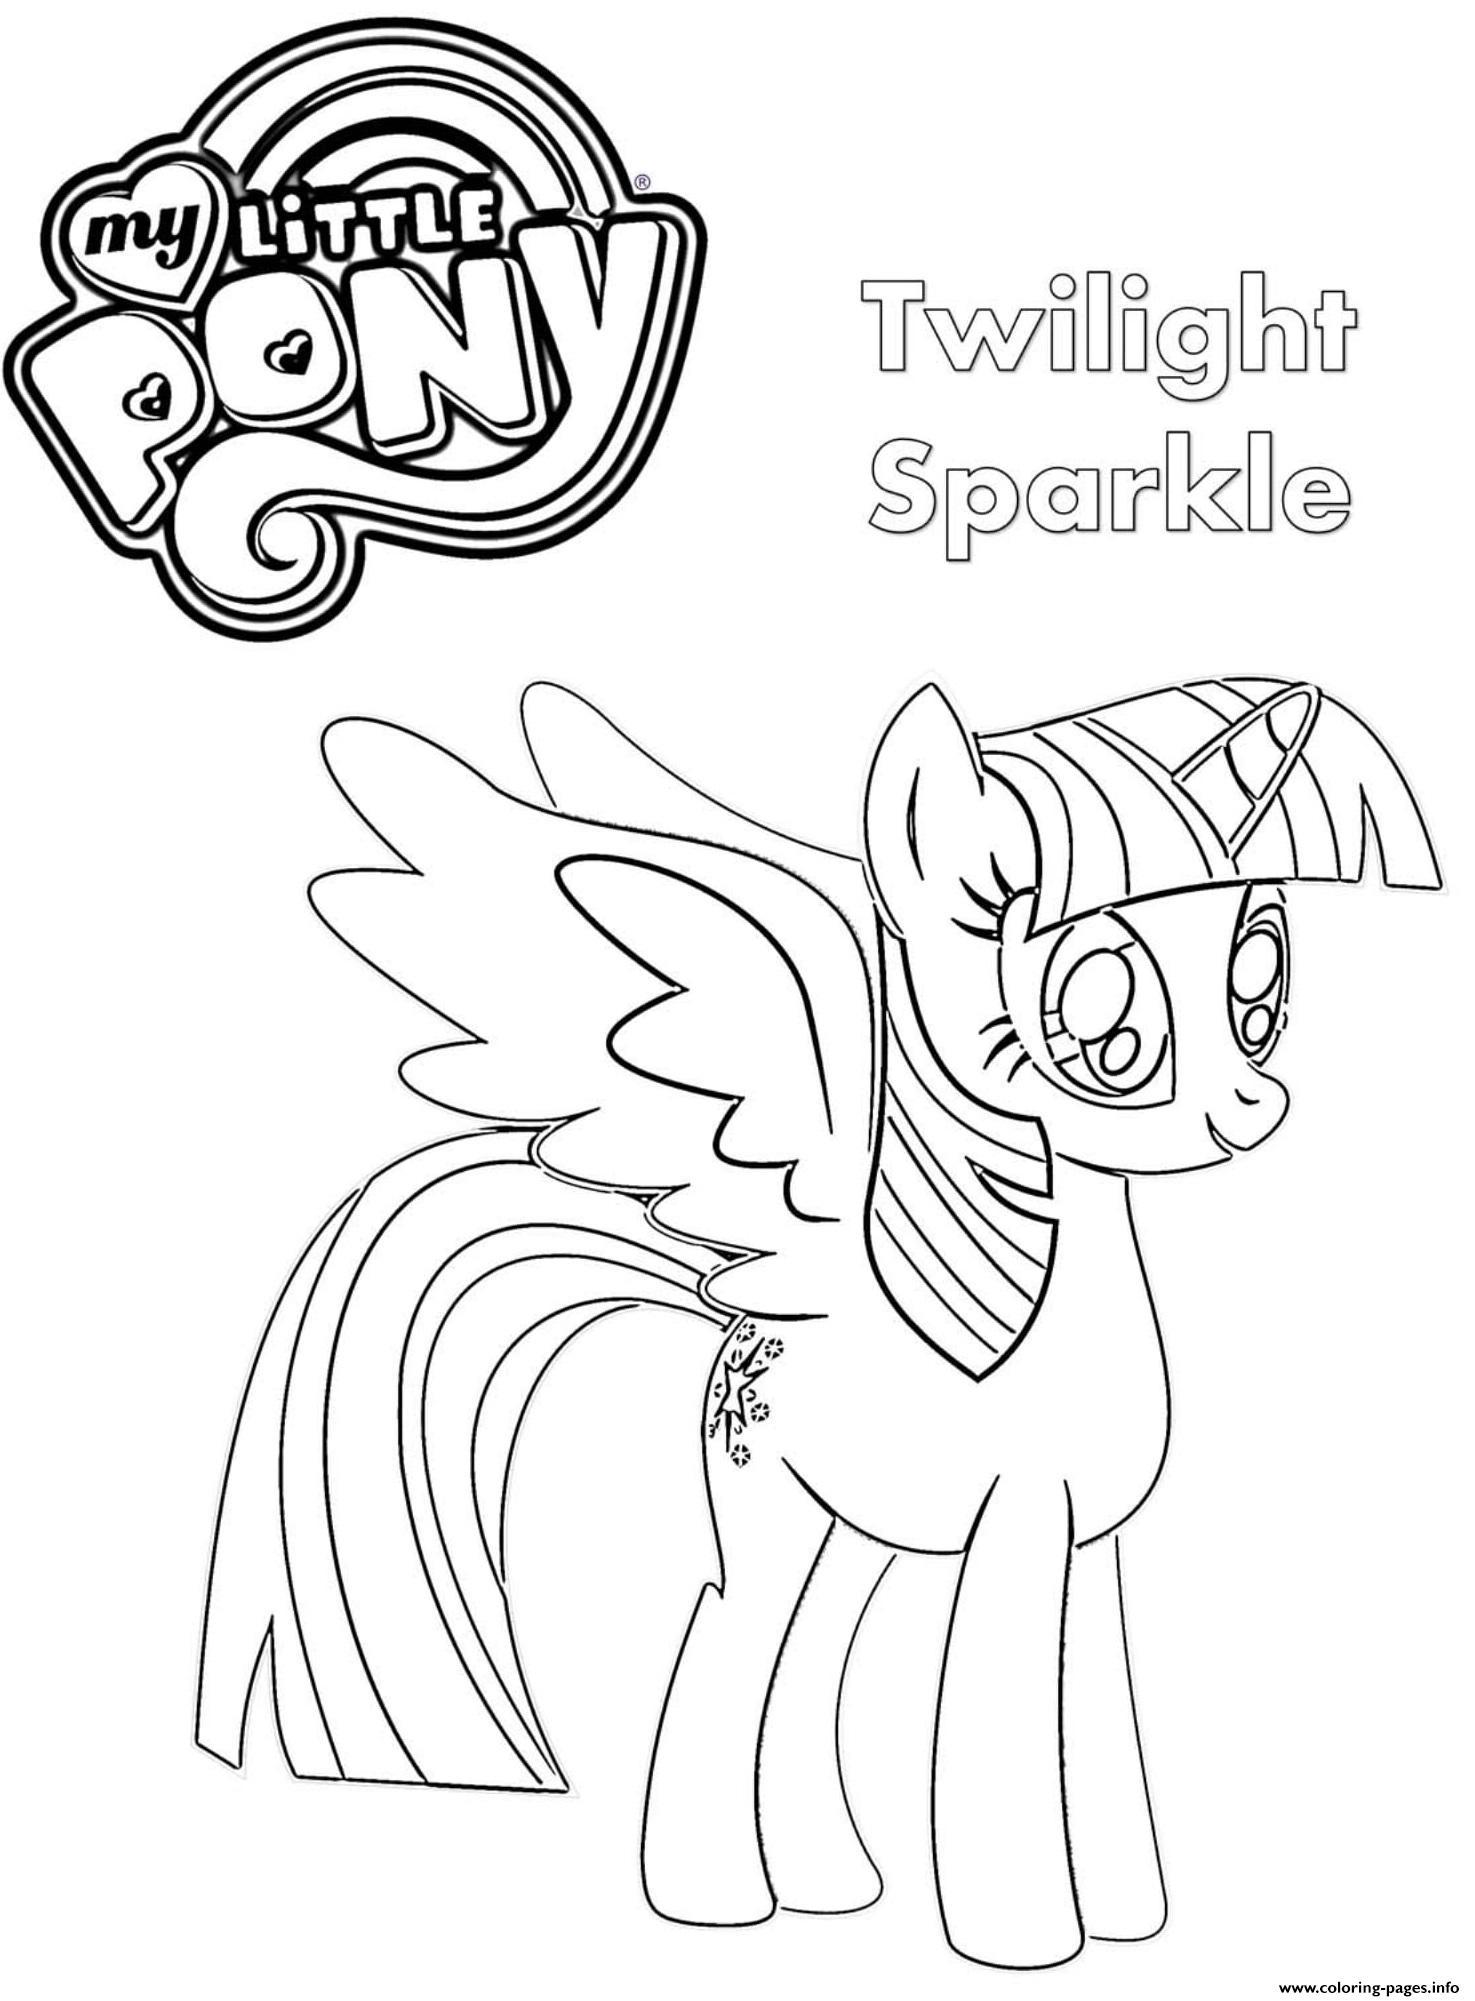 Twilightparkle My Little Pony Coloring Pages Printable 1549995710twilight  Equestria Girls – Dialogueeurope